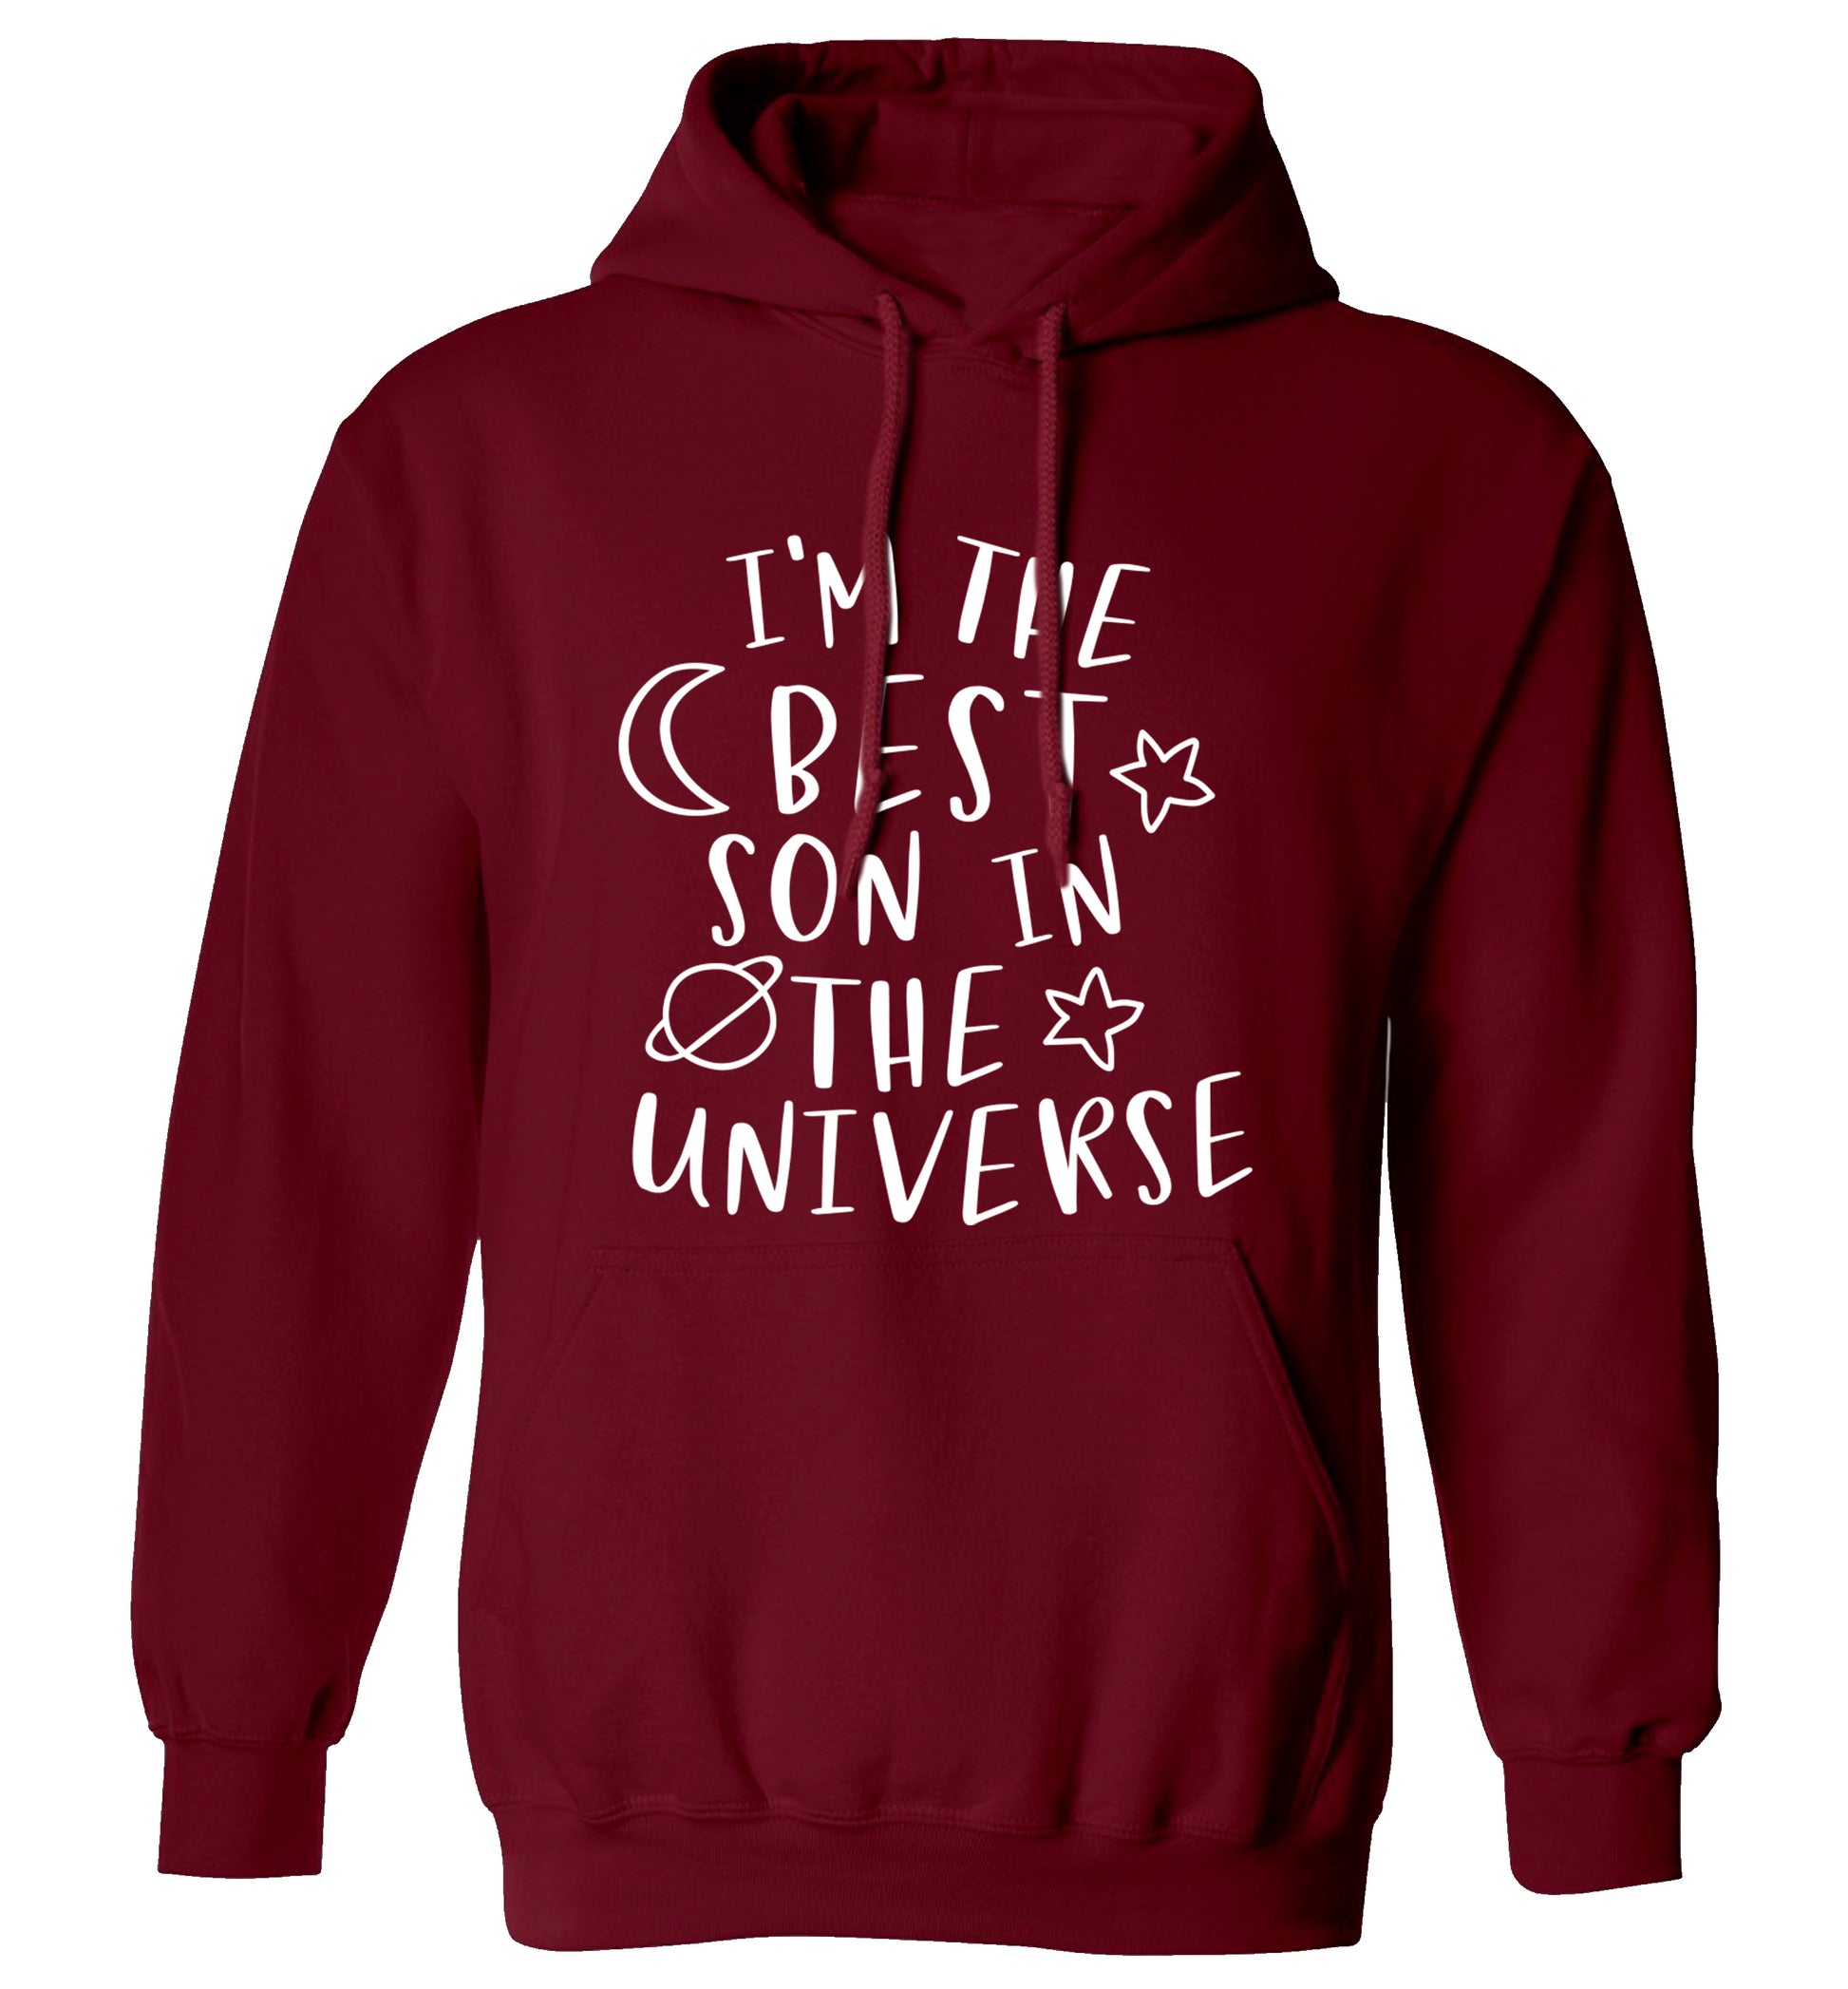 I'm the best son in the universe adults unisex maroon hoodie 2XL